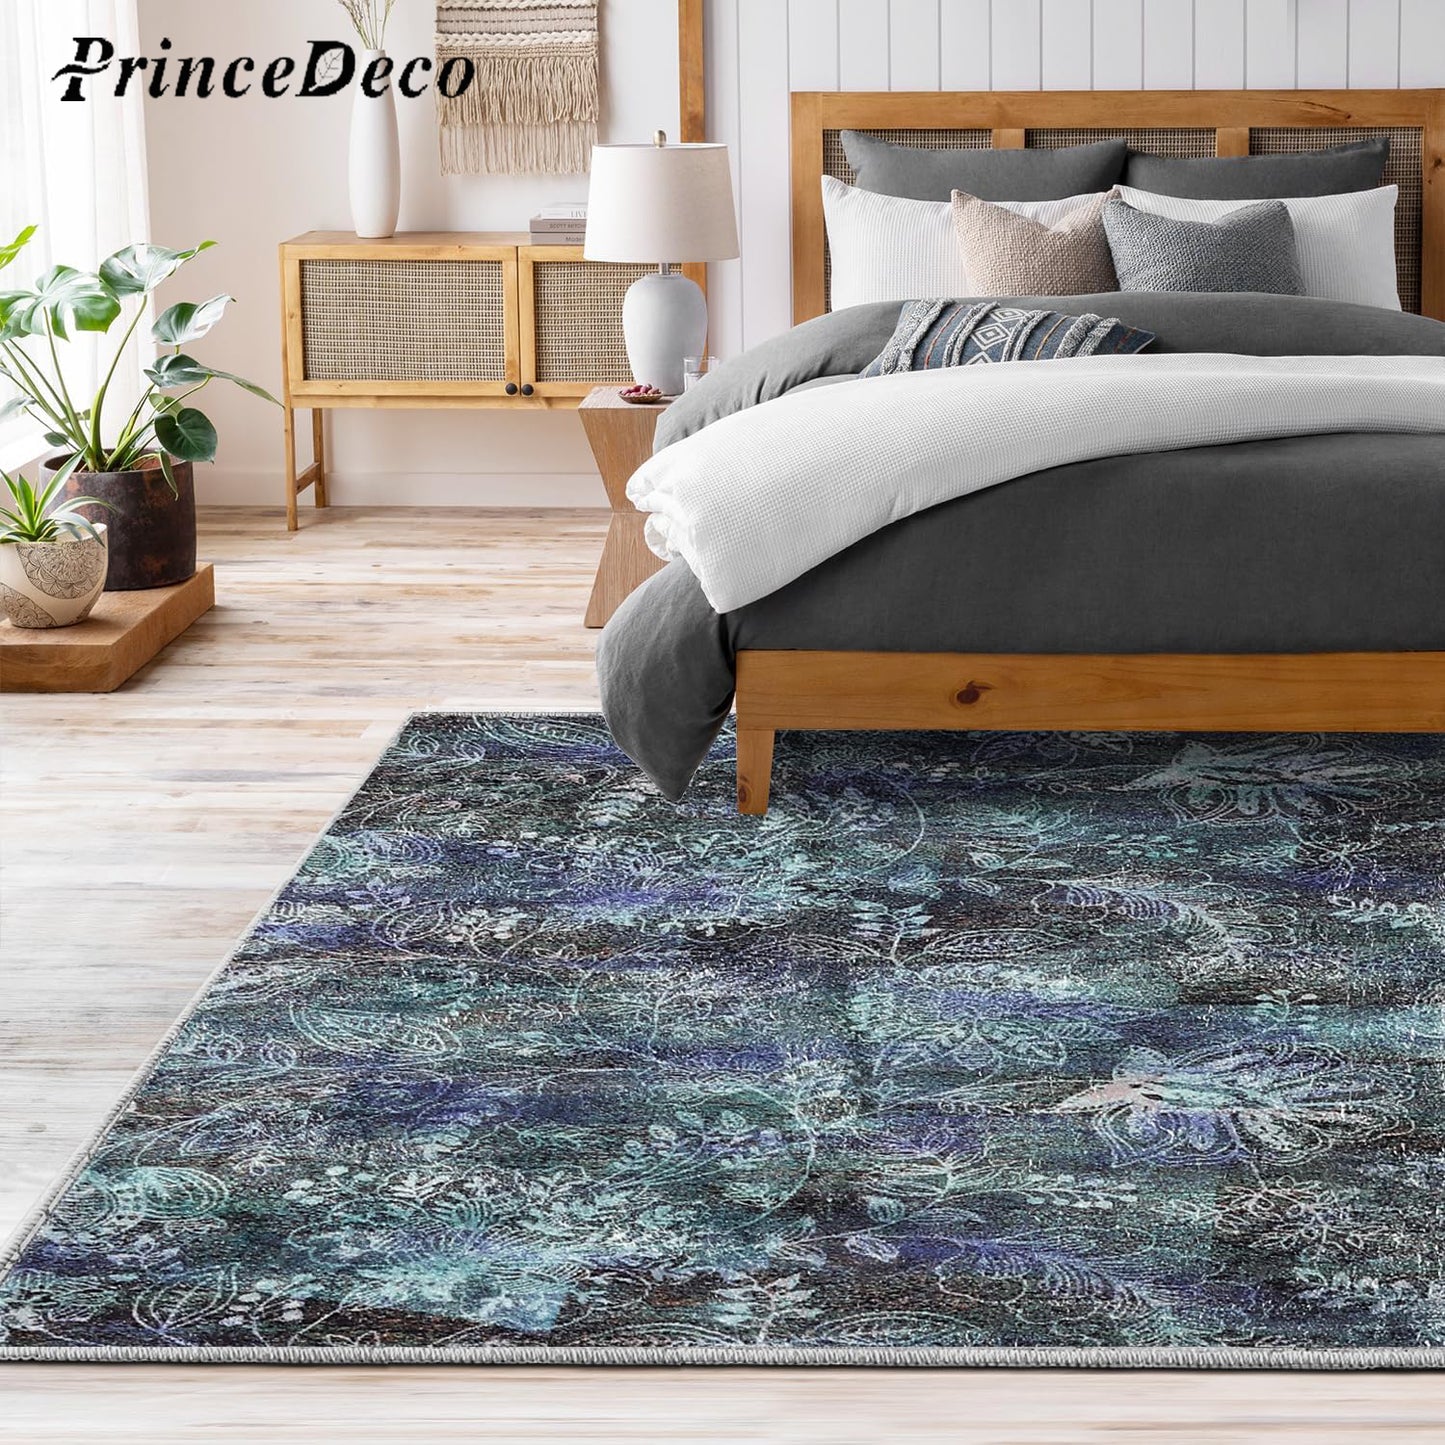 Prince Deco Area Rugs for Bedroom Paisley Floral Area Rug Fluffy Rug for Entryway Indoor Floor Rug Carpet for Front Door Bedroom Living Room Anti-Skid Durable Rectangular Rug Washable